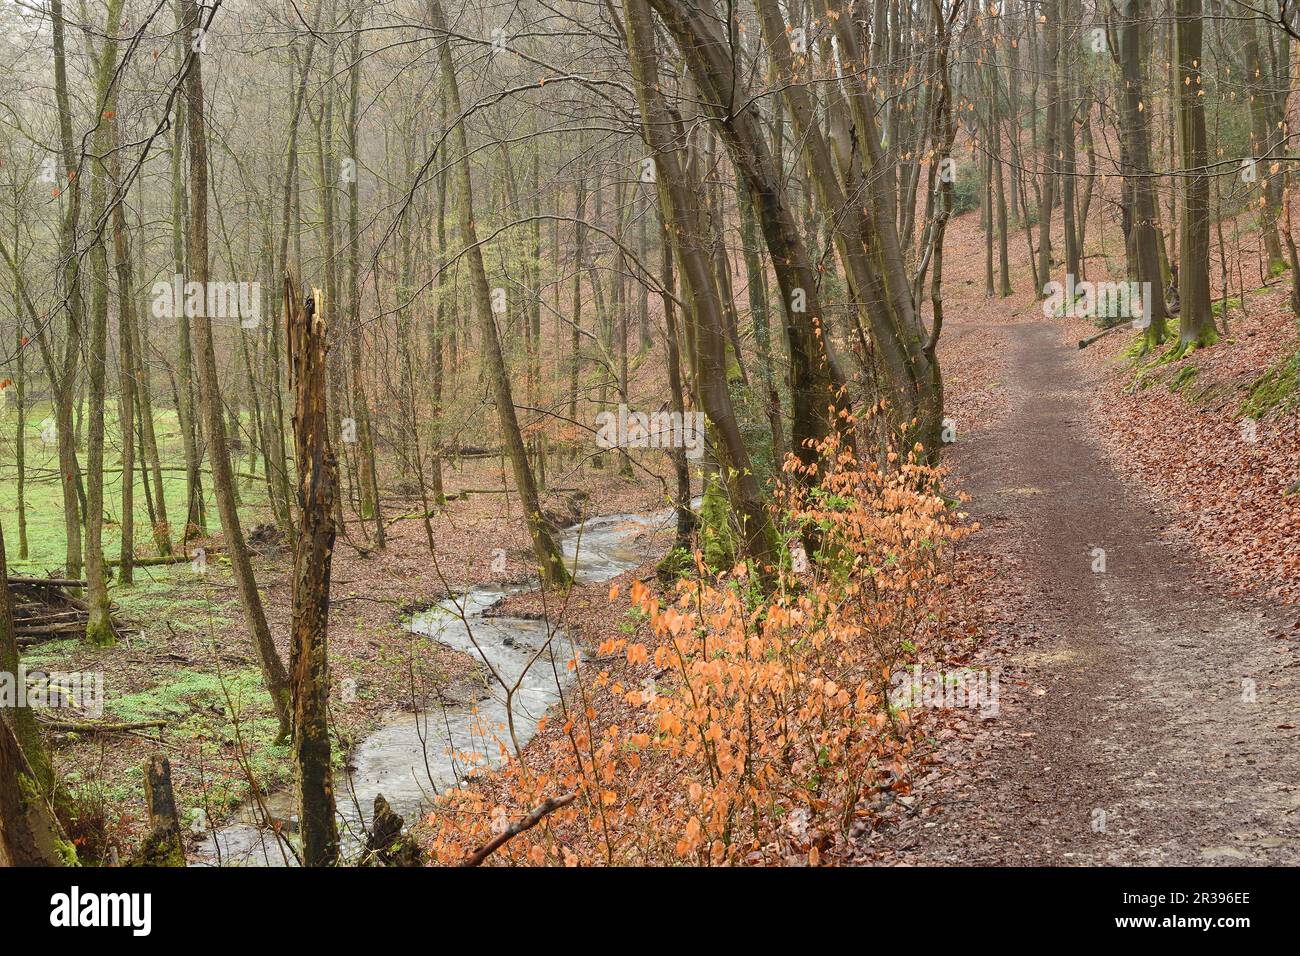 Forest path and stream on a misty morning during early spring. Bergisches Land, North Rhine - Westphalia, Germany. Stock Photo